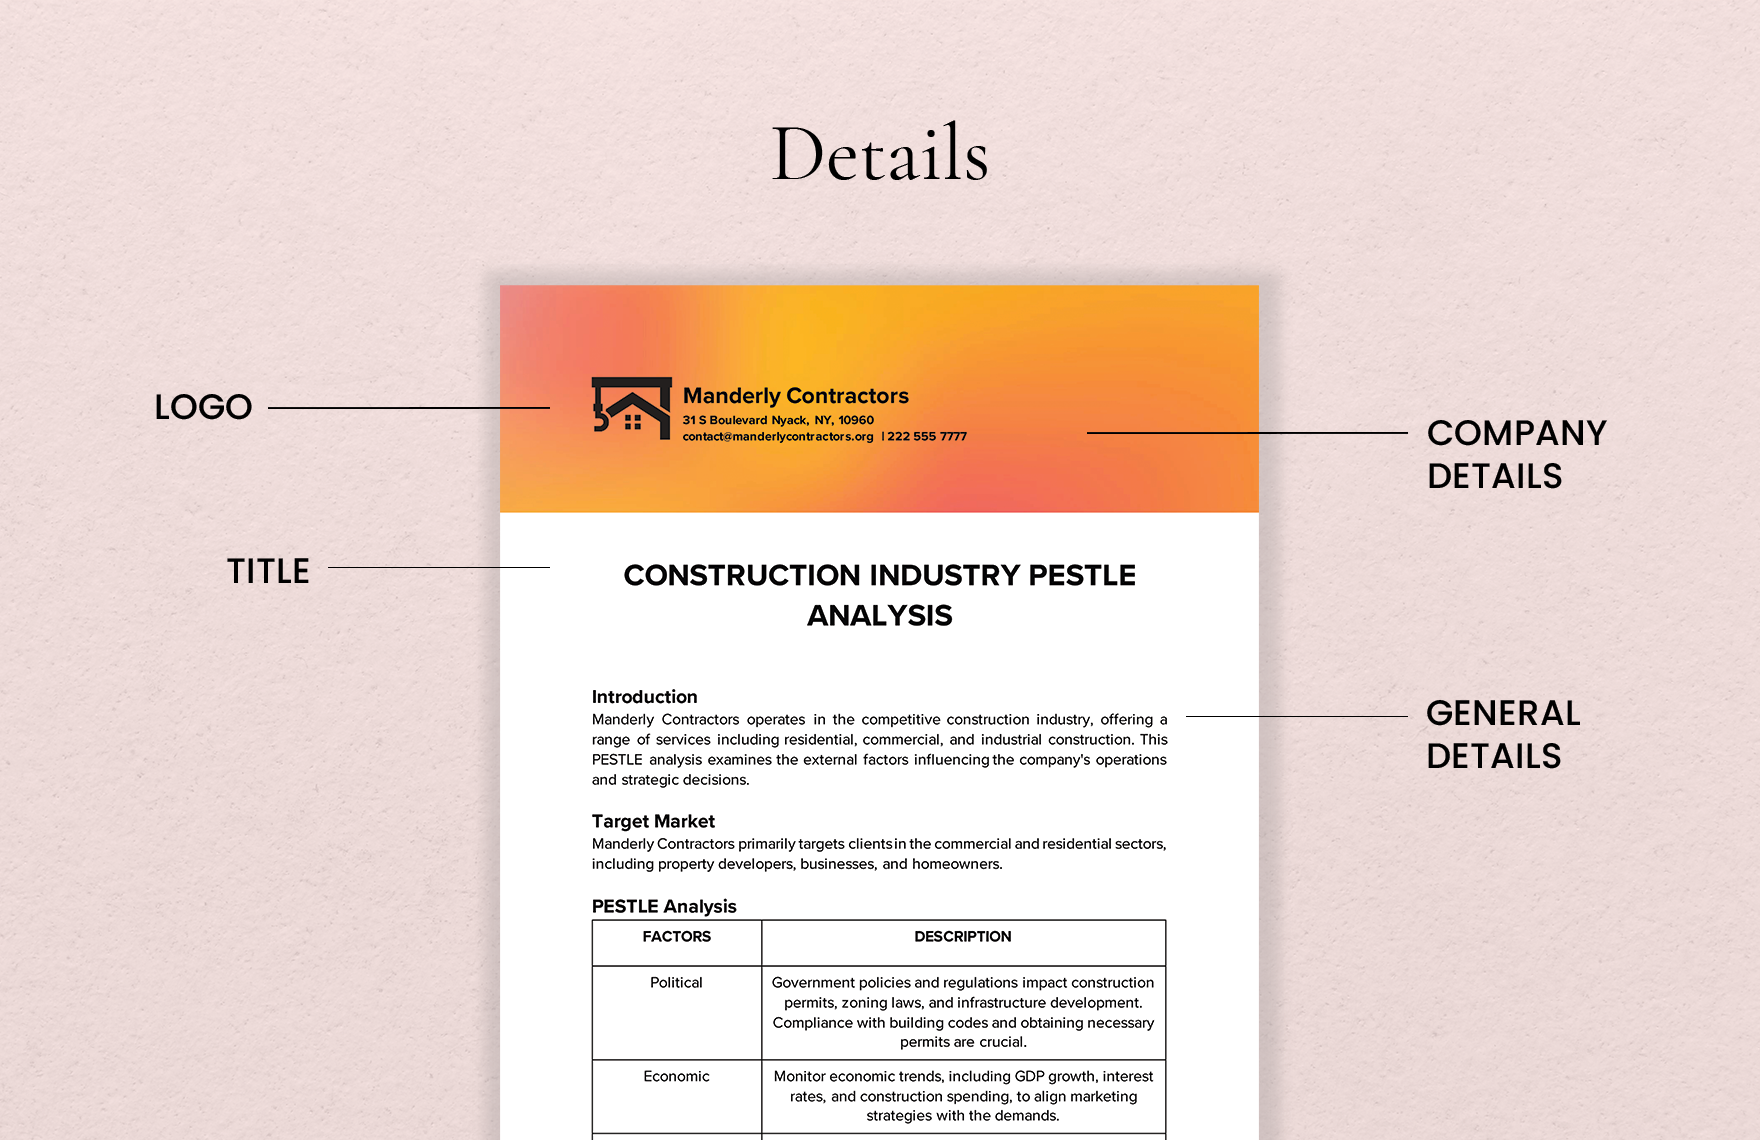 Construction Industry PESTLE Analysis Template